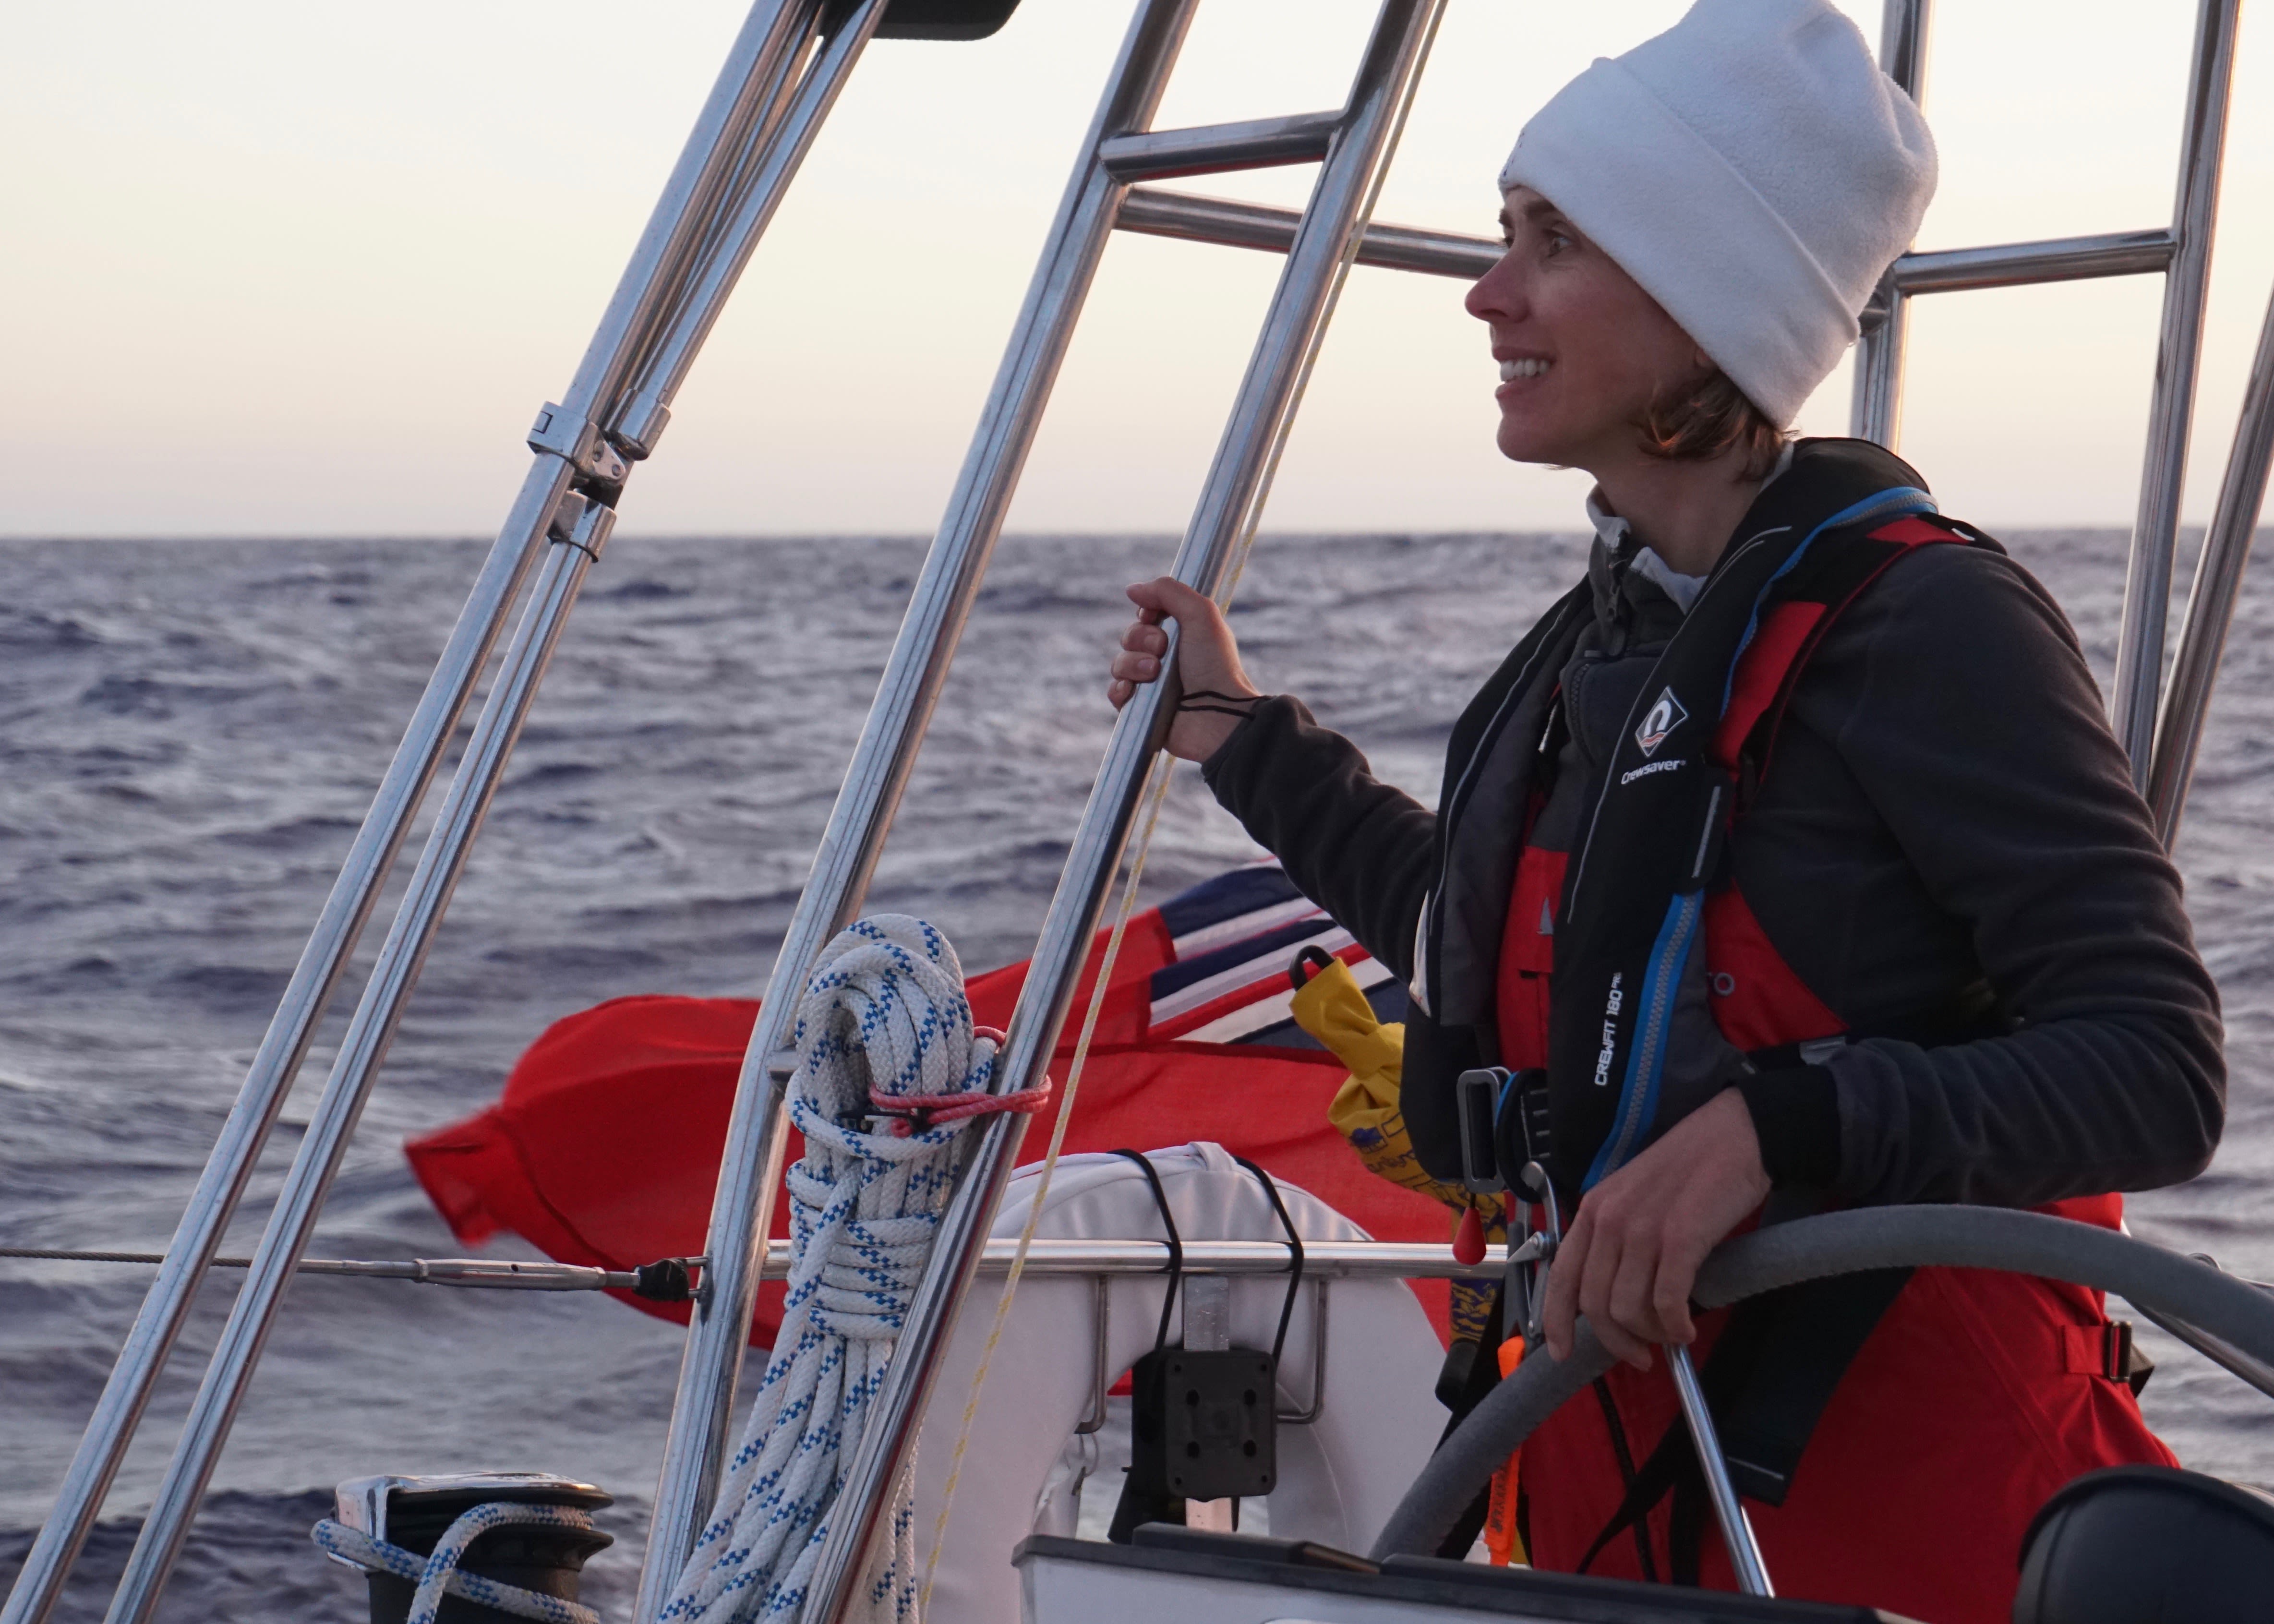 First look: North Sails' foul weather gear - Yachting World